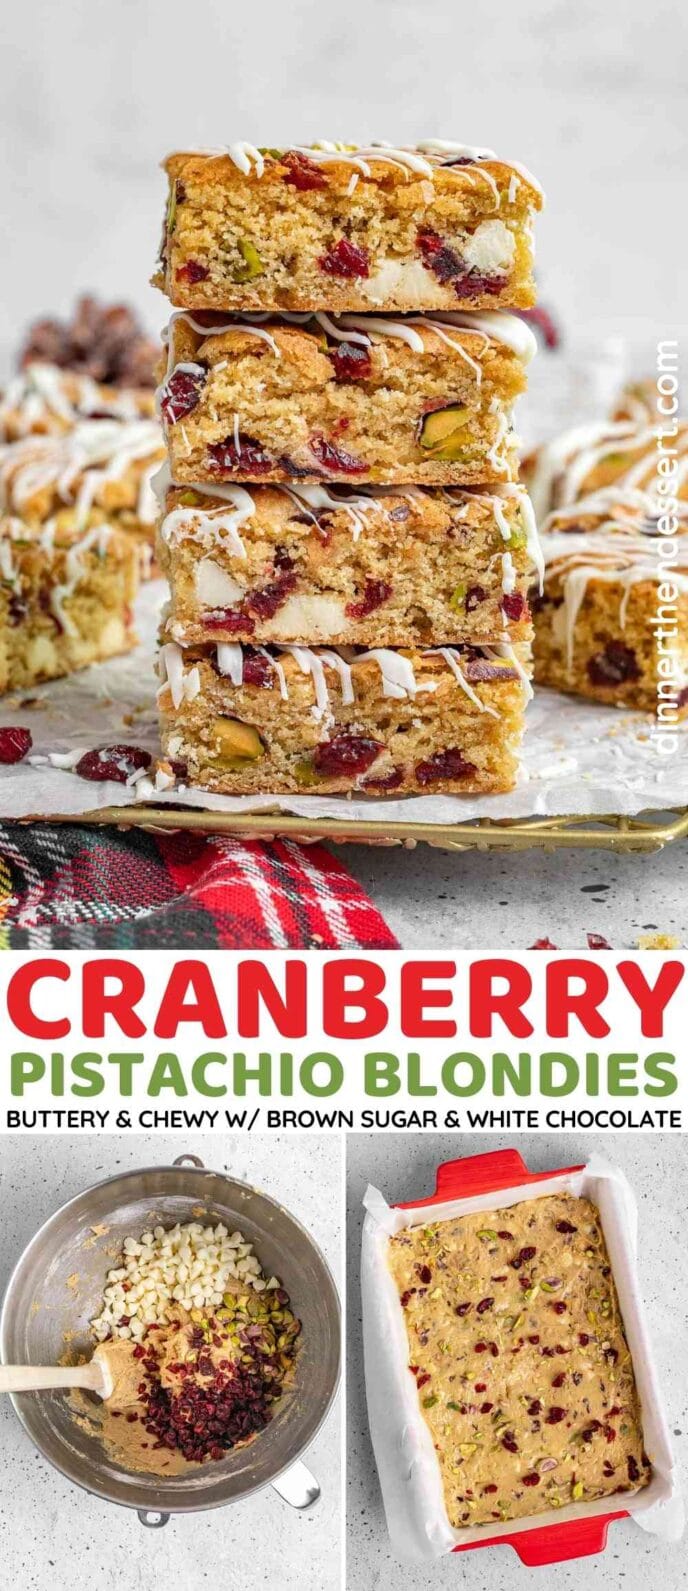 Cranberry Pistachio Blondies Collage with large photo of stacked bars, title across middle, and two small pictures of the batter in the bowl and spread in a pan.